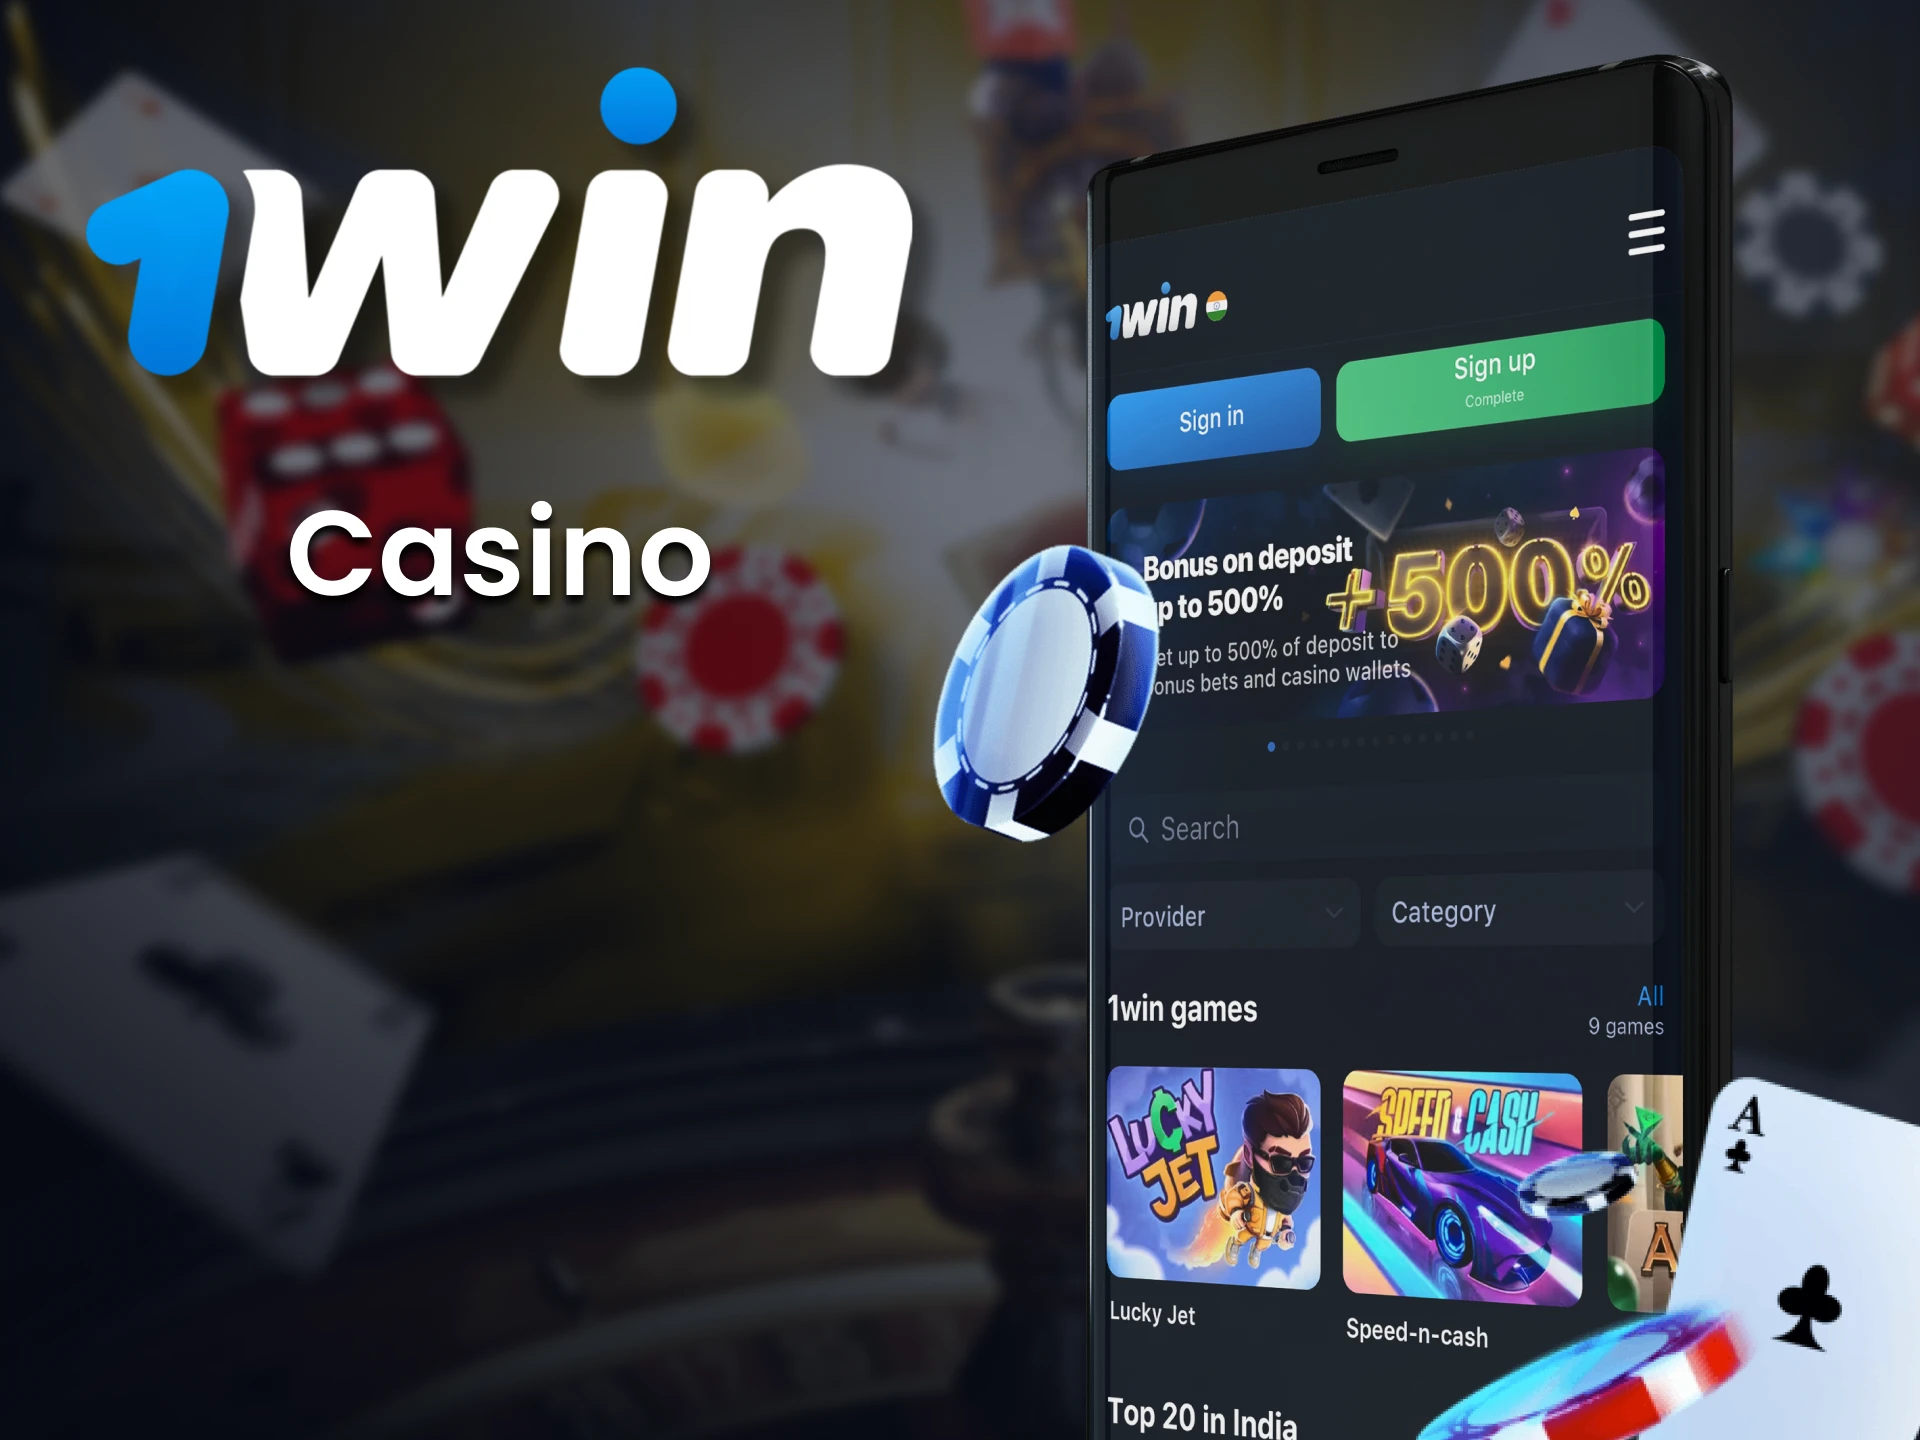 Use the 1win app India to bet on casino games.